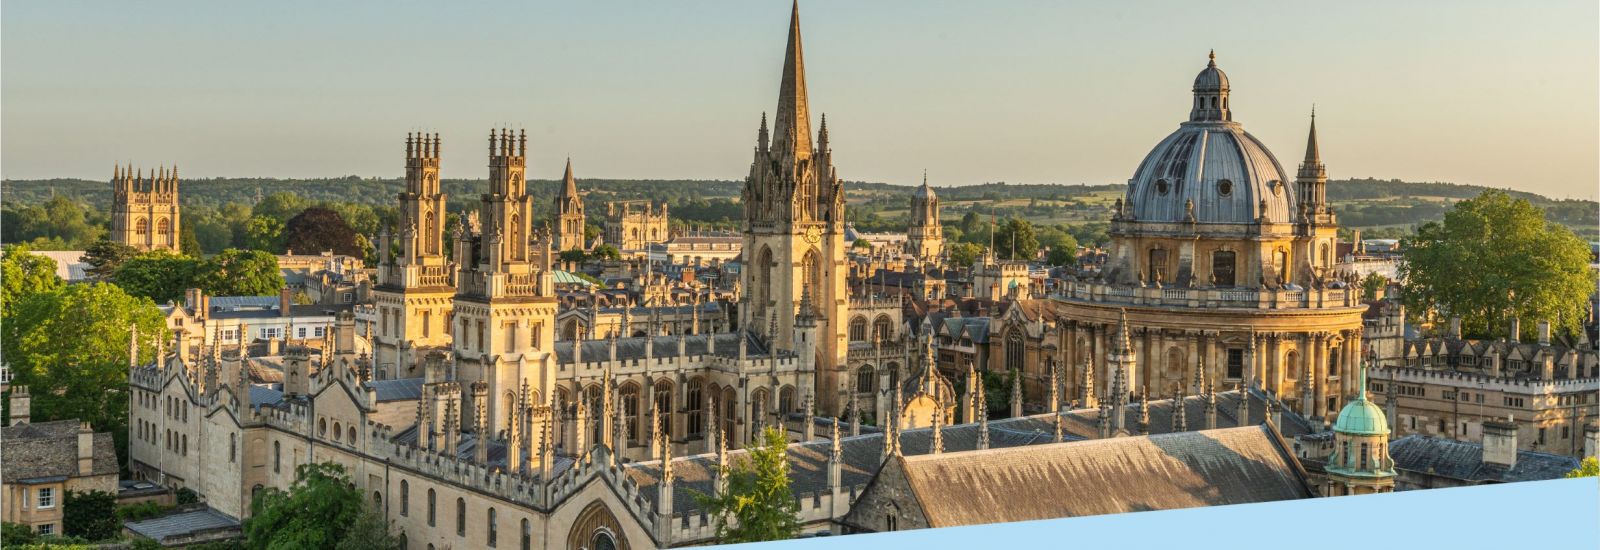 Oxford city skyline including the Radcliffe Camera, University Church spire and All Souls College